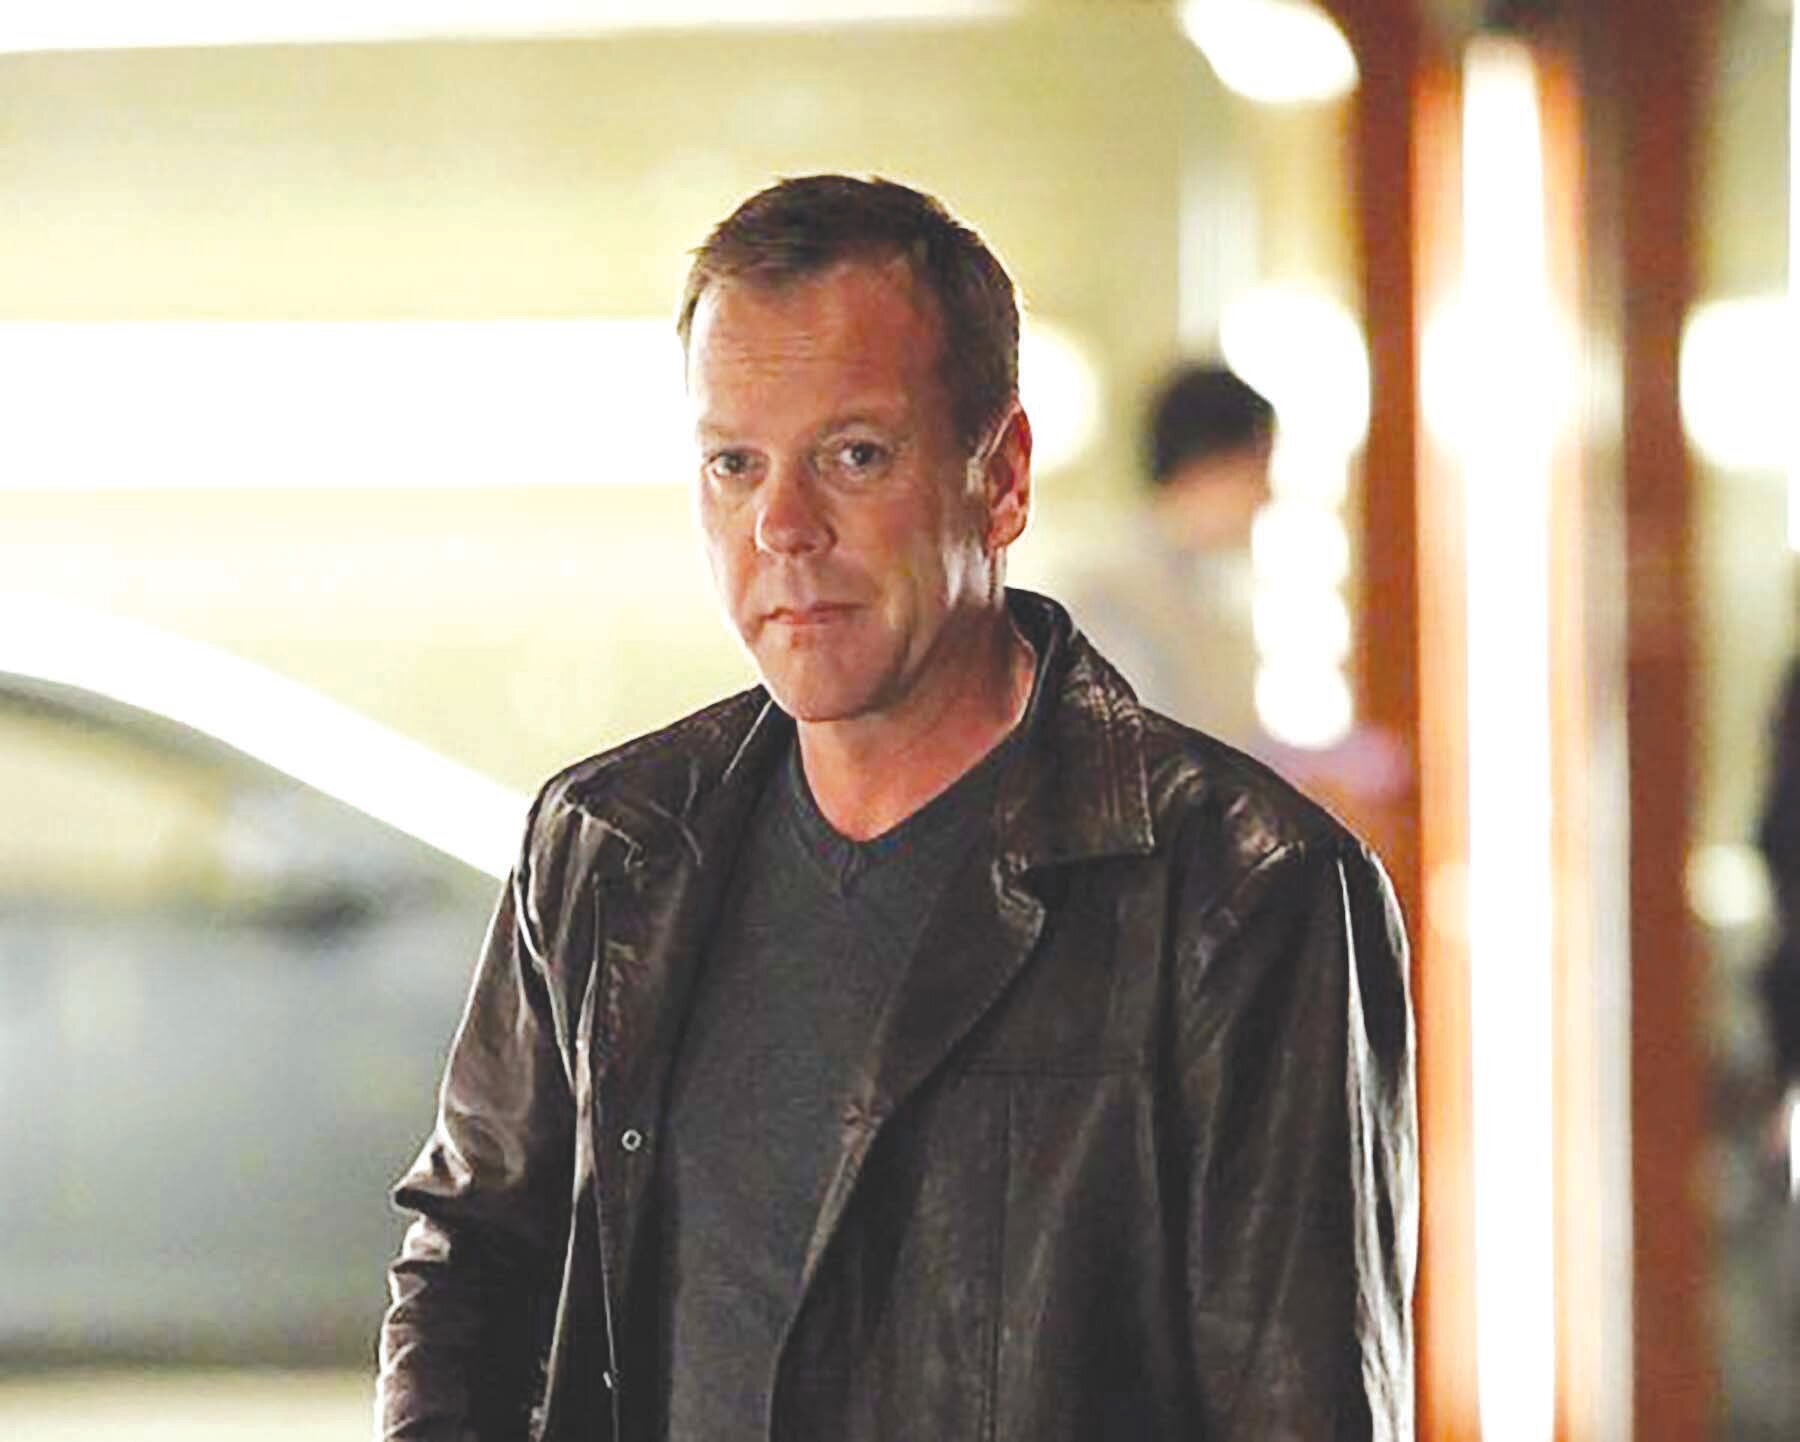 Kiefer Sutherland portrays government agent Jack Bauer as part of the Counter Terrorist Unit on "24."